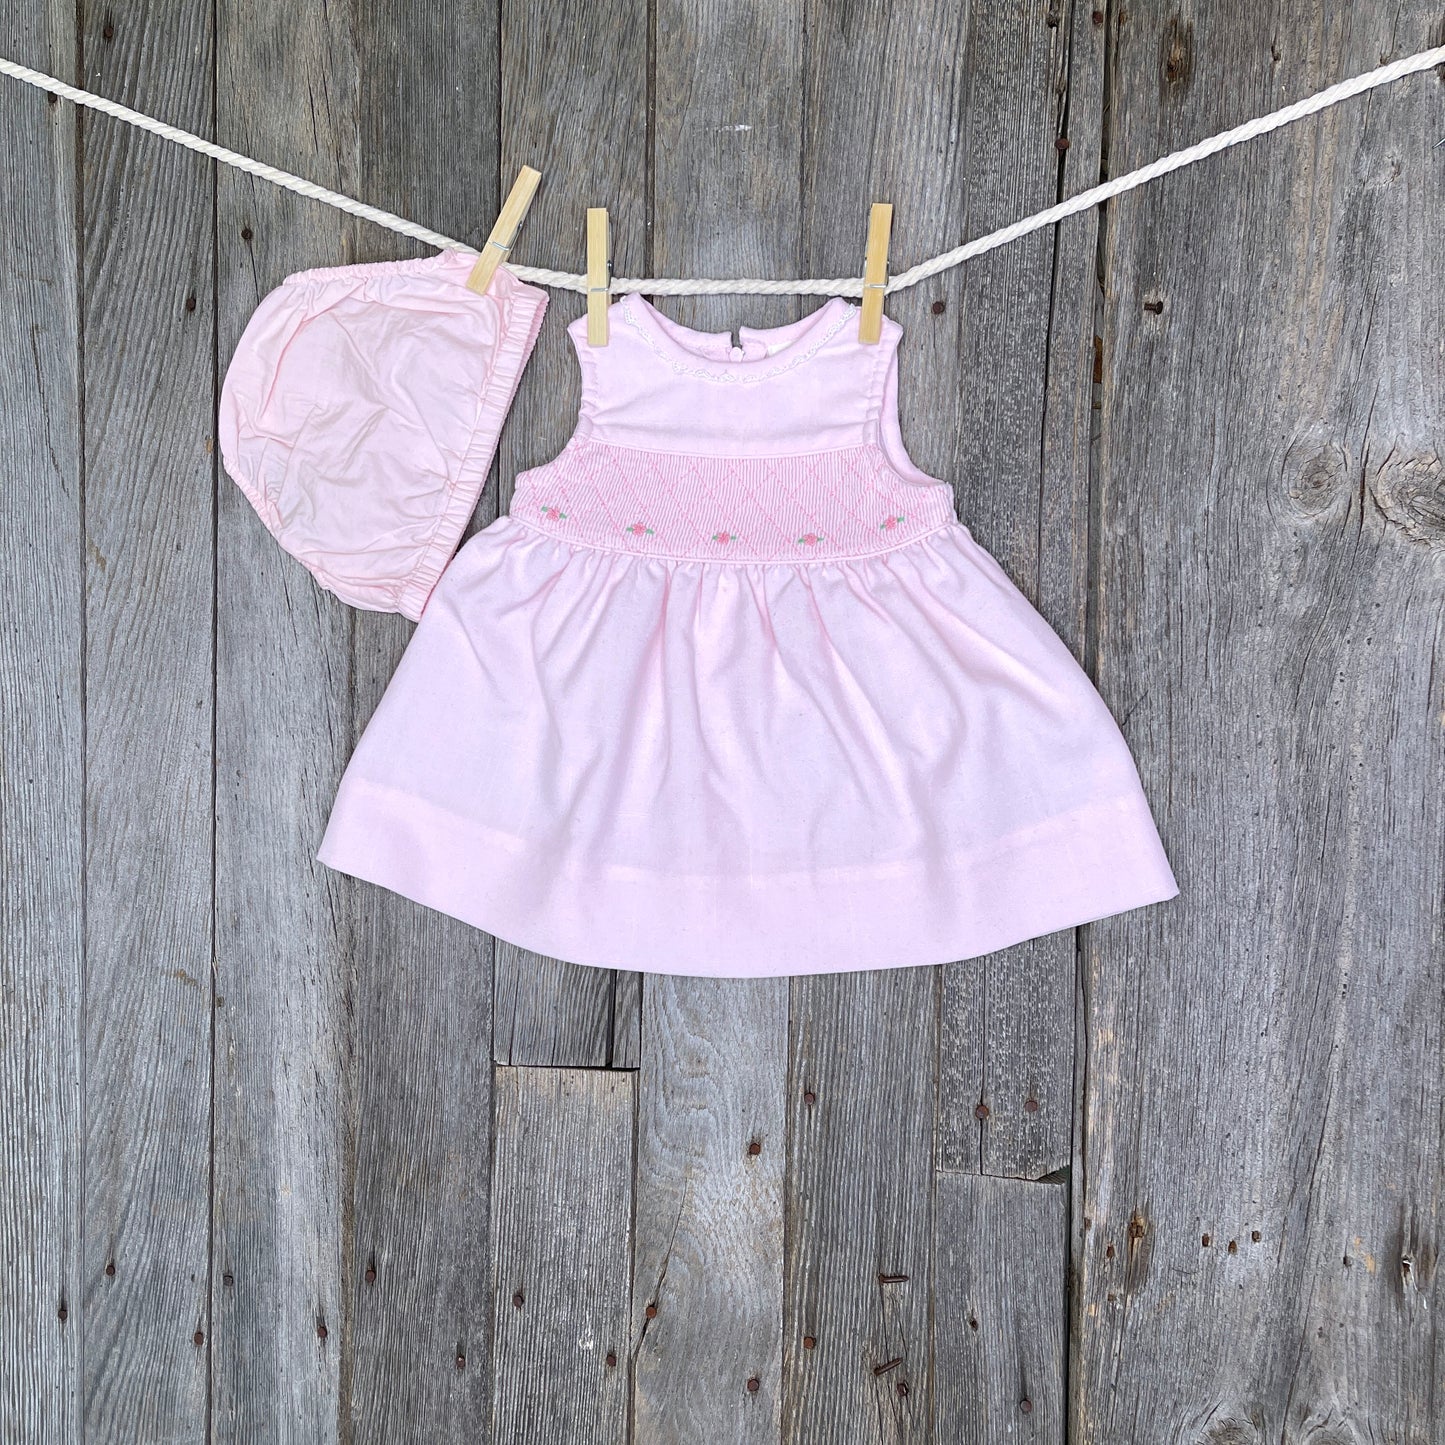 One Piece Outfit Dress 3-6 Months BCP (7151750283442)